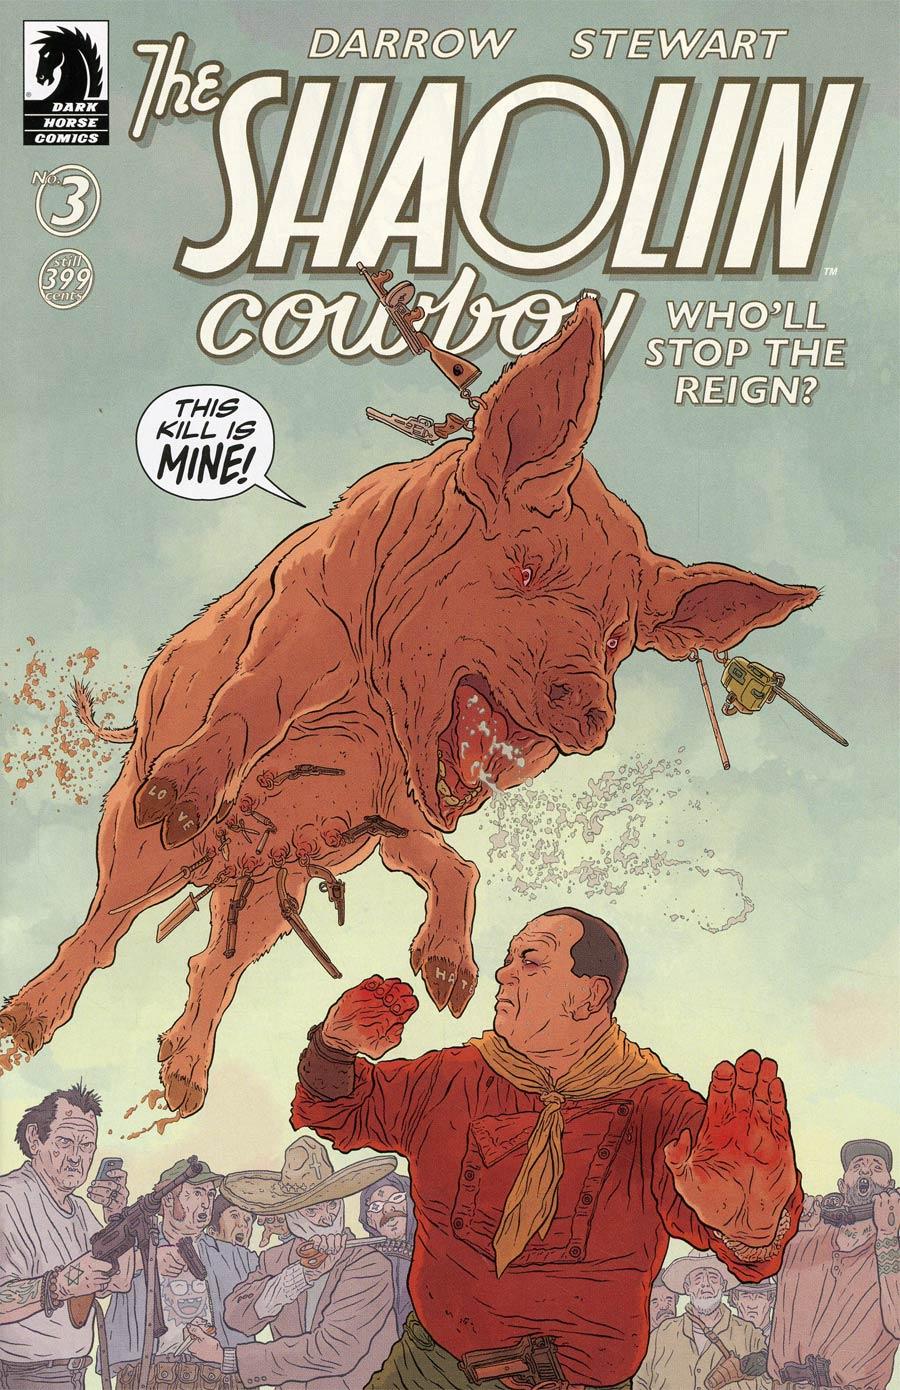 Shaolin Cowboy Wholl Stop The Reign Vol. 1 #3